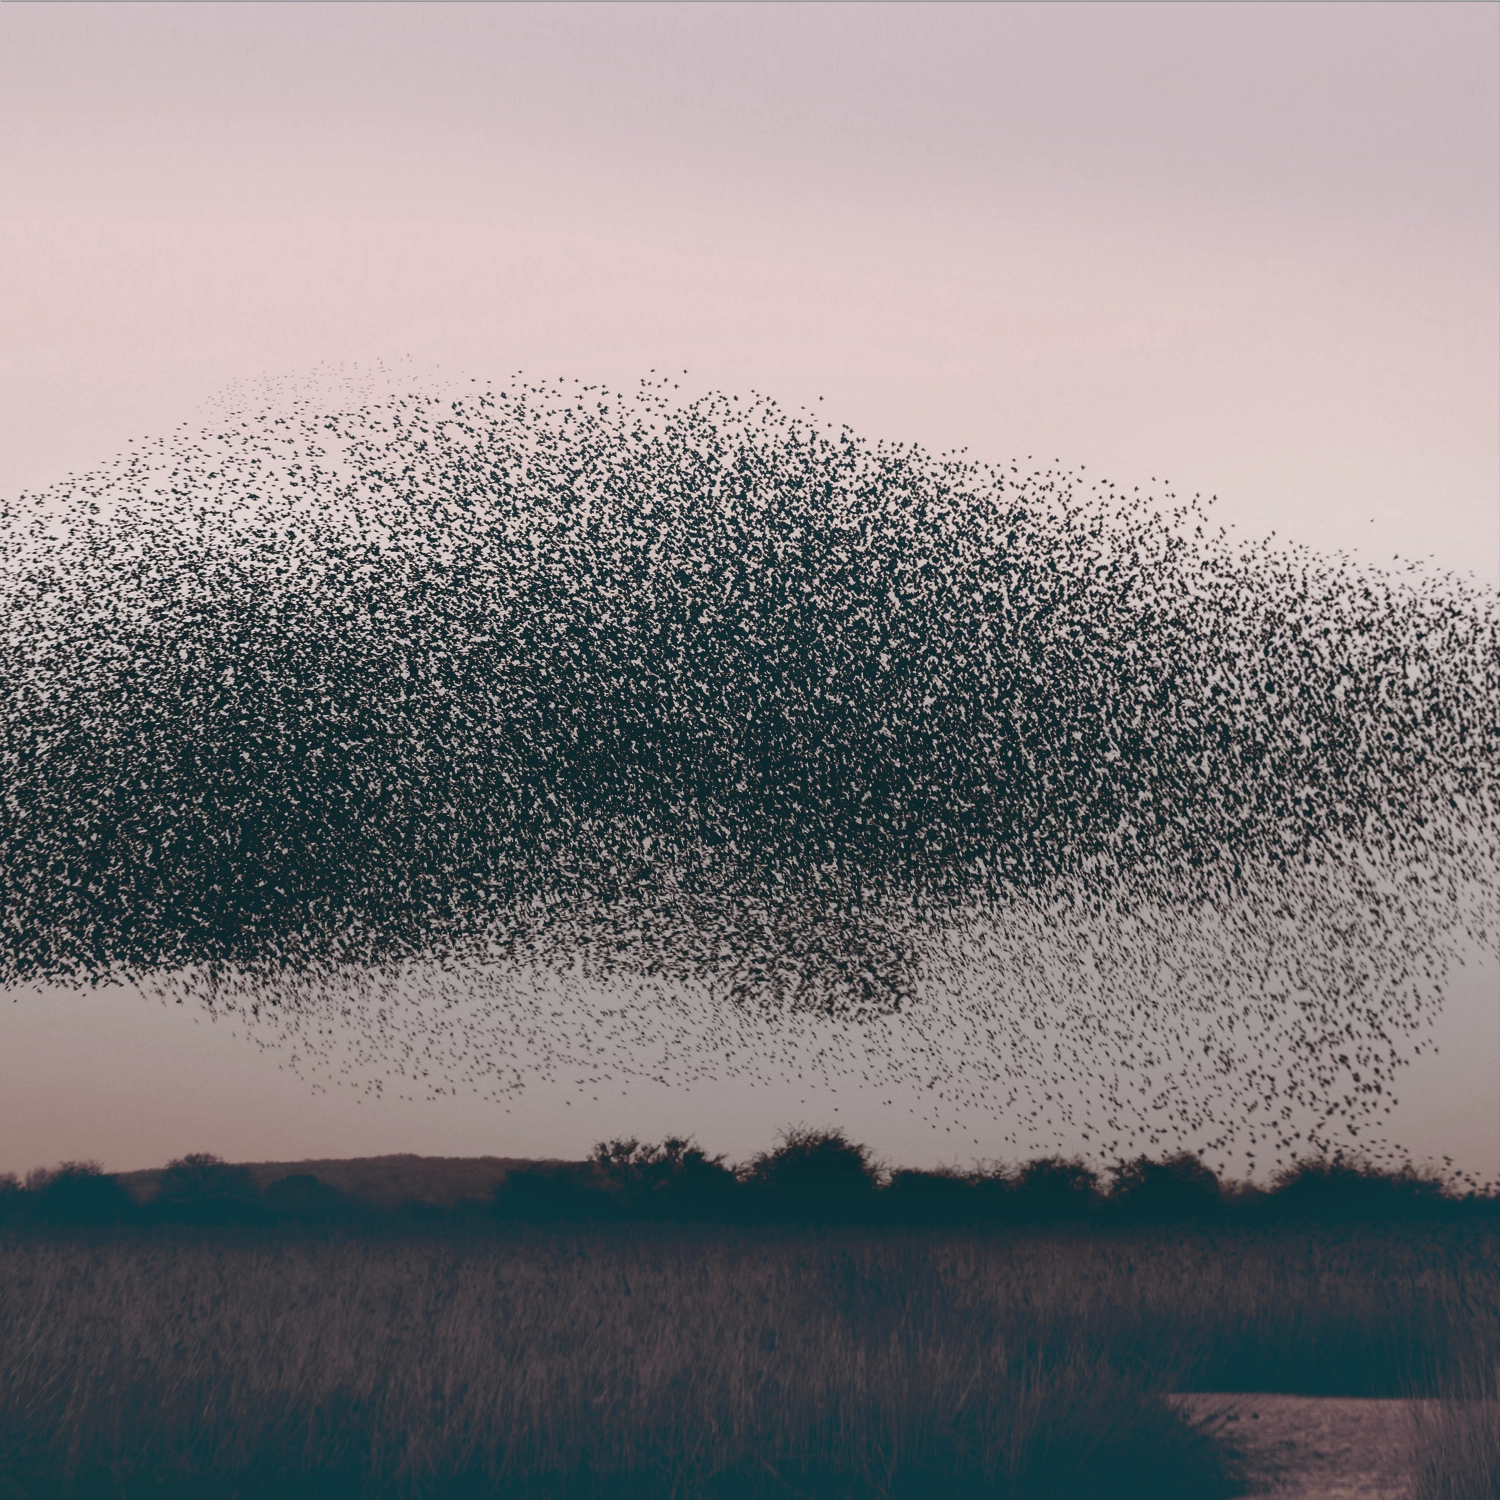 A murmuration of starlings, thousands of birds forming a dense black cloud in the sky over a dark landscape